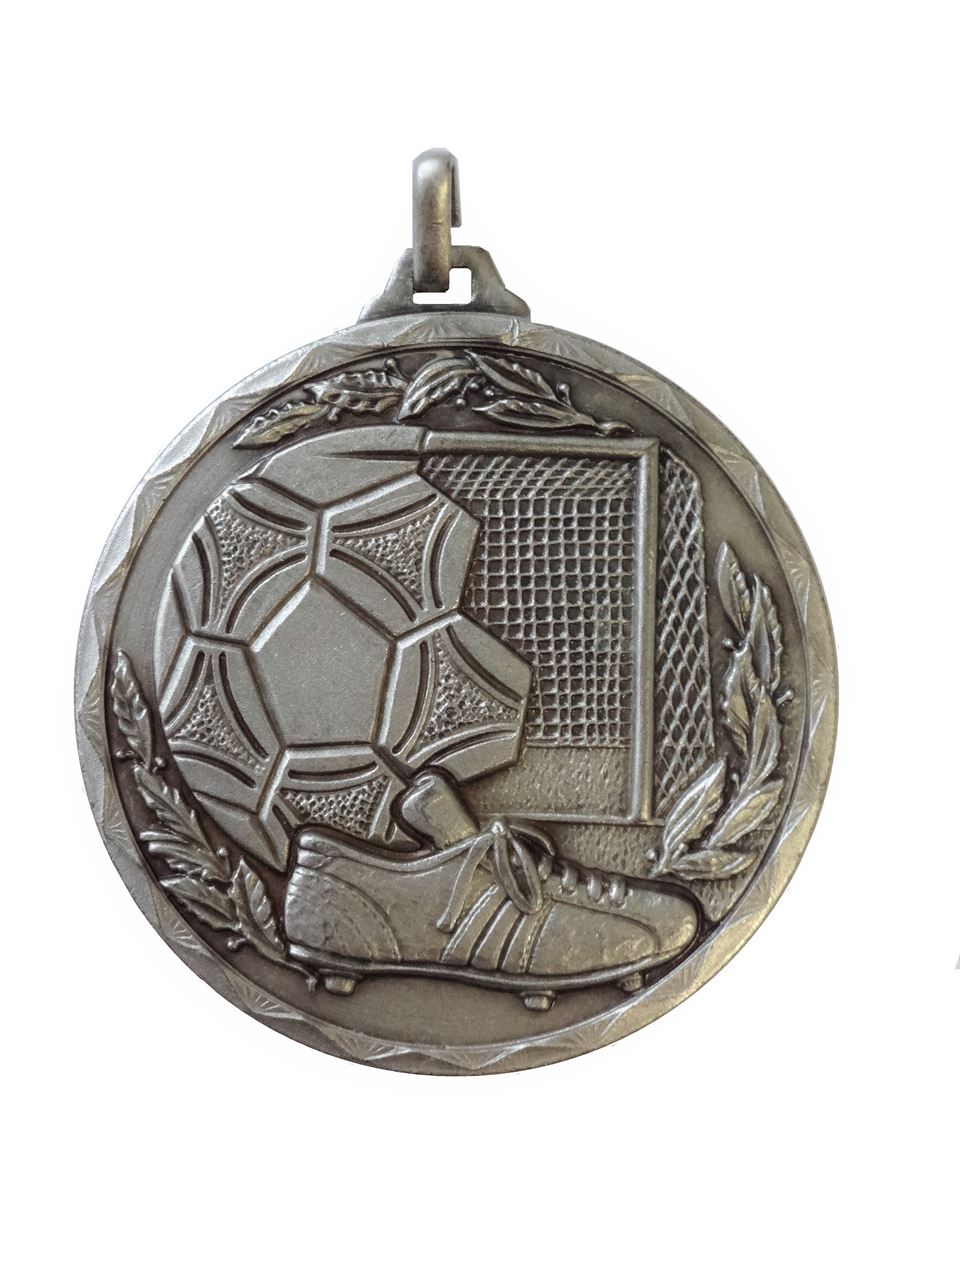 Silver Economy Football Boot Medal (size: 52mm) - 174E